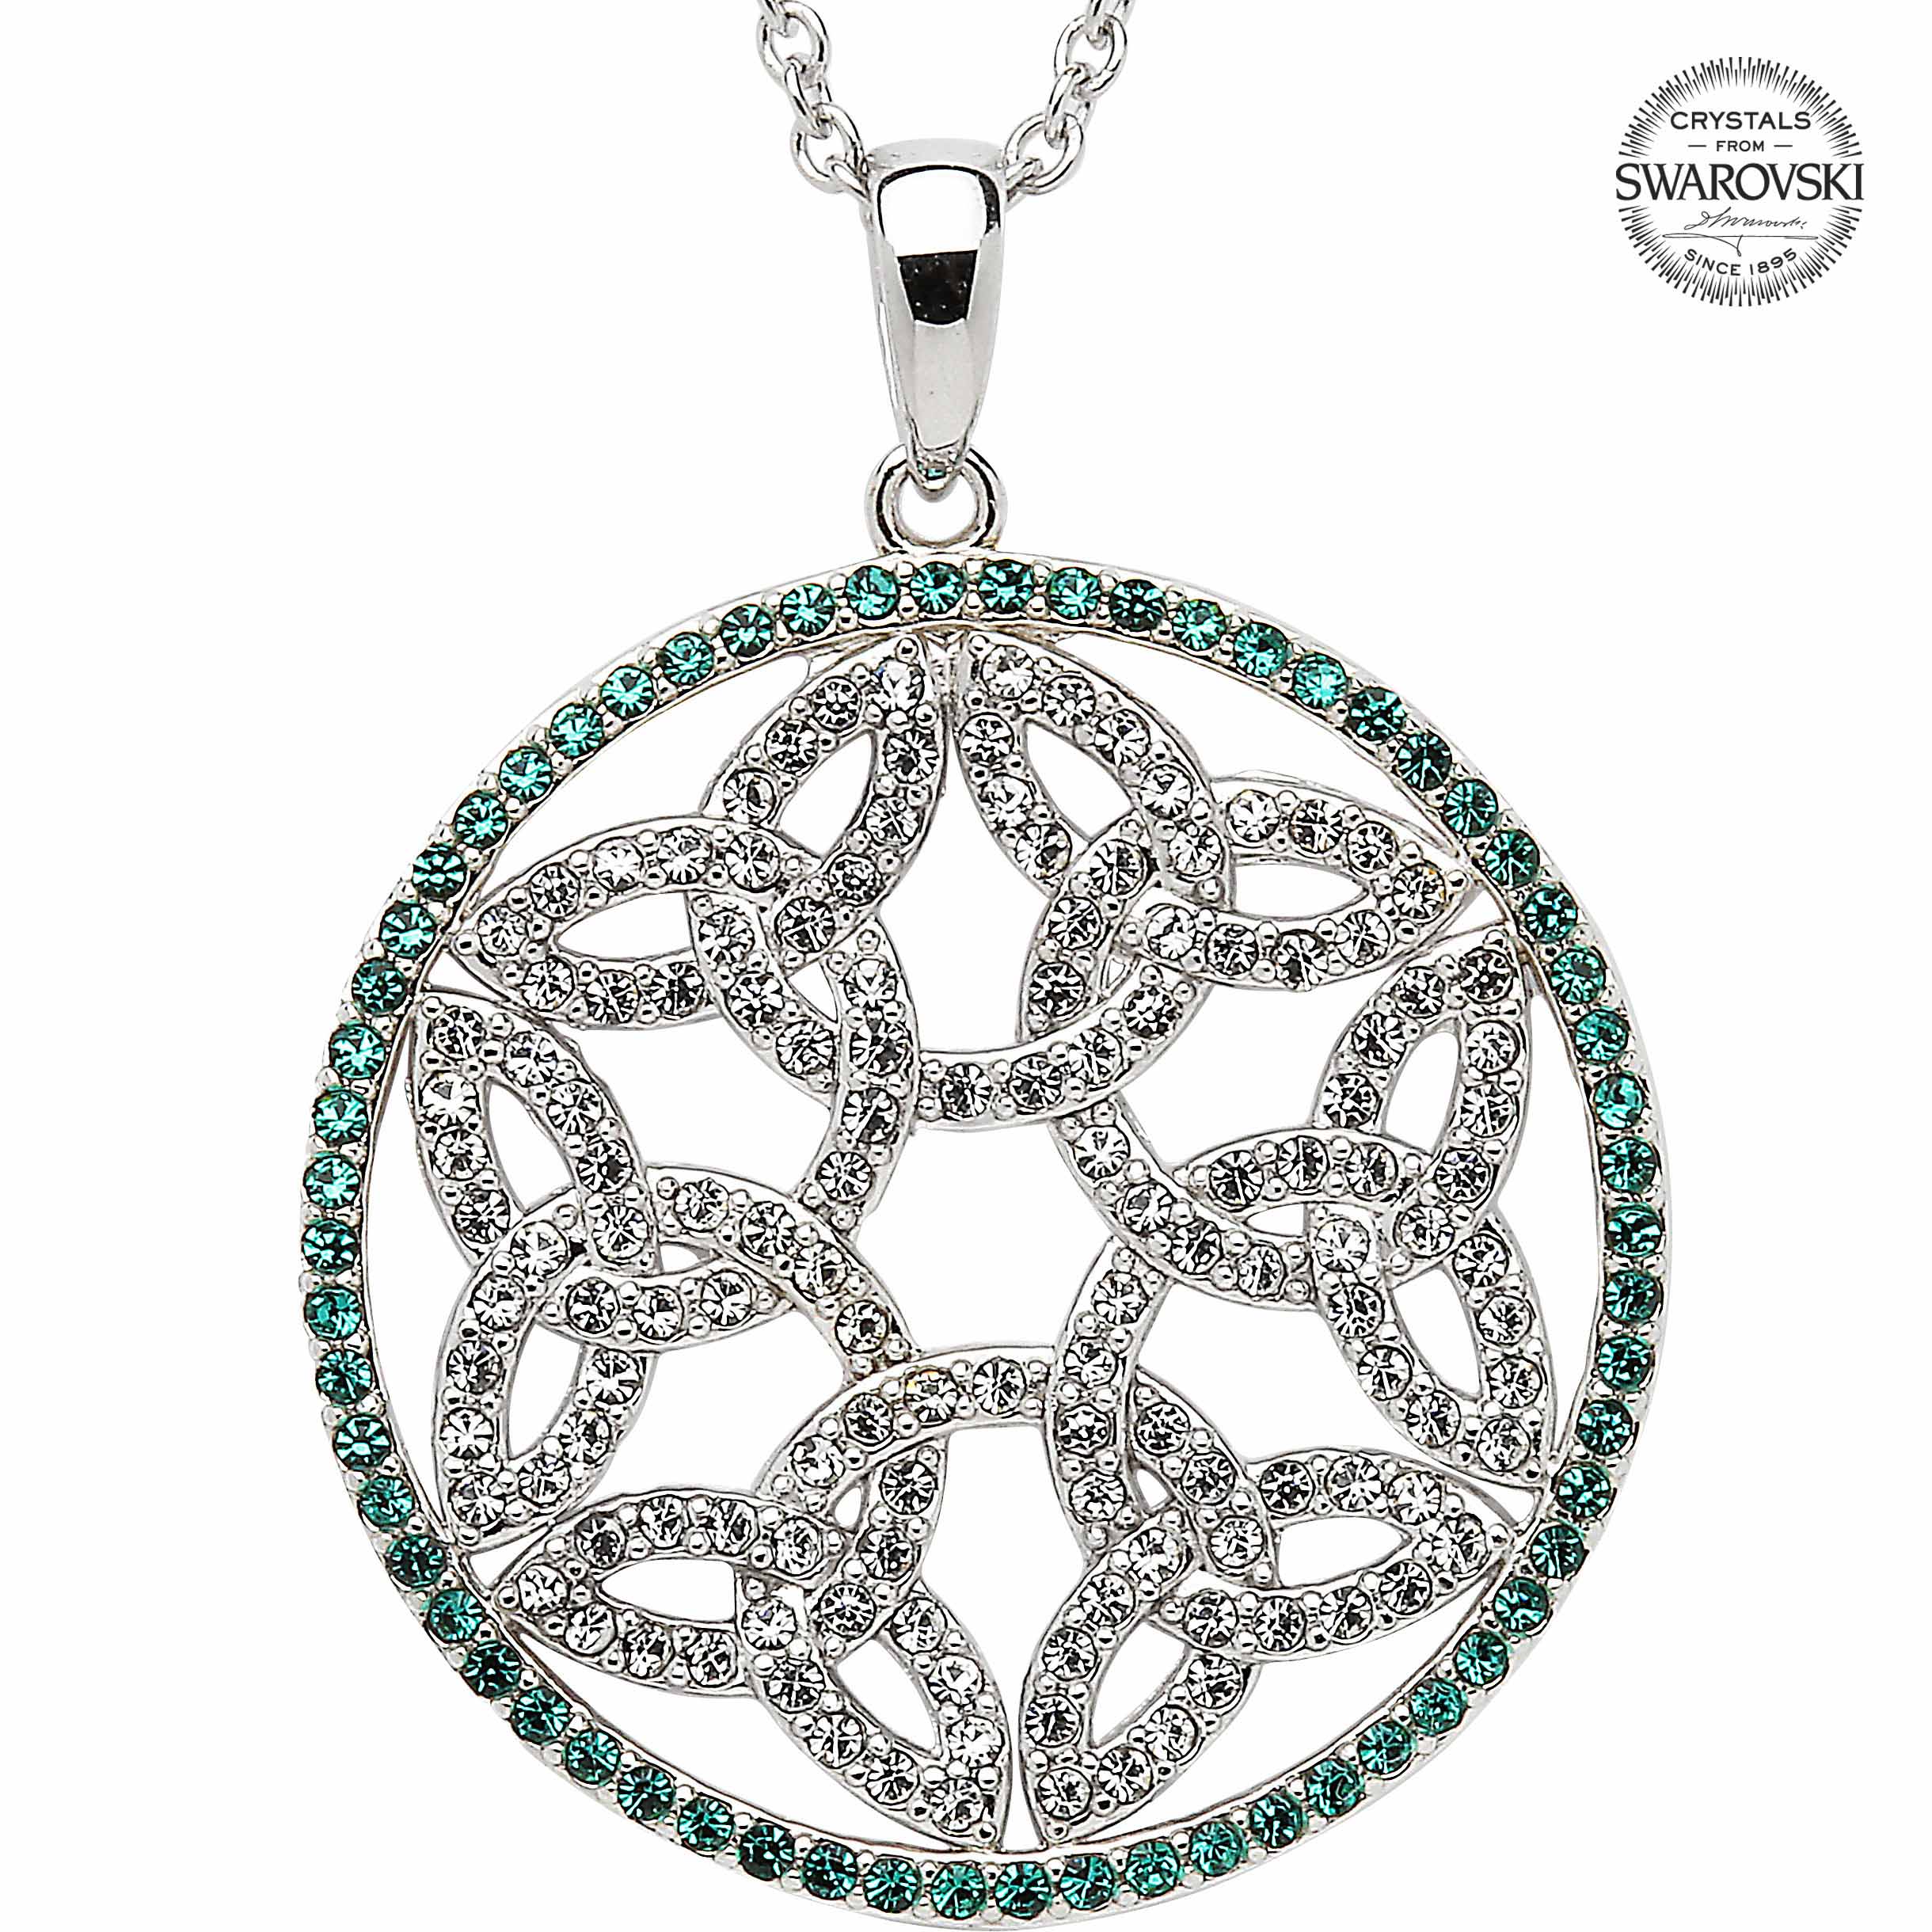 Product image for Trinity Knot Necklace - Sterling Silver Trinity Knot Circle Pendant Encrusted with Emerald Swarovski Crystals